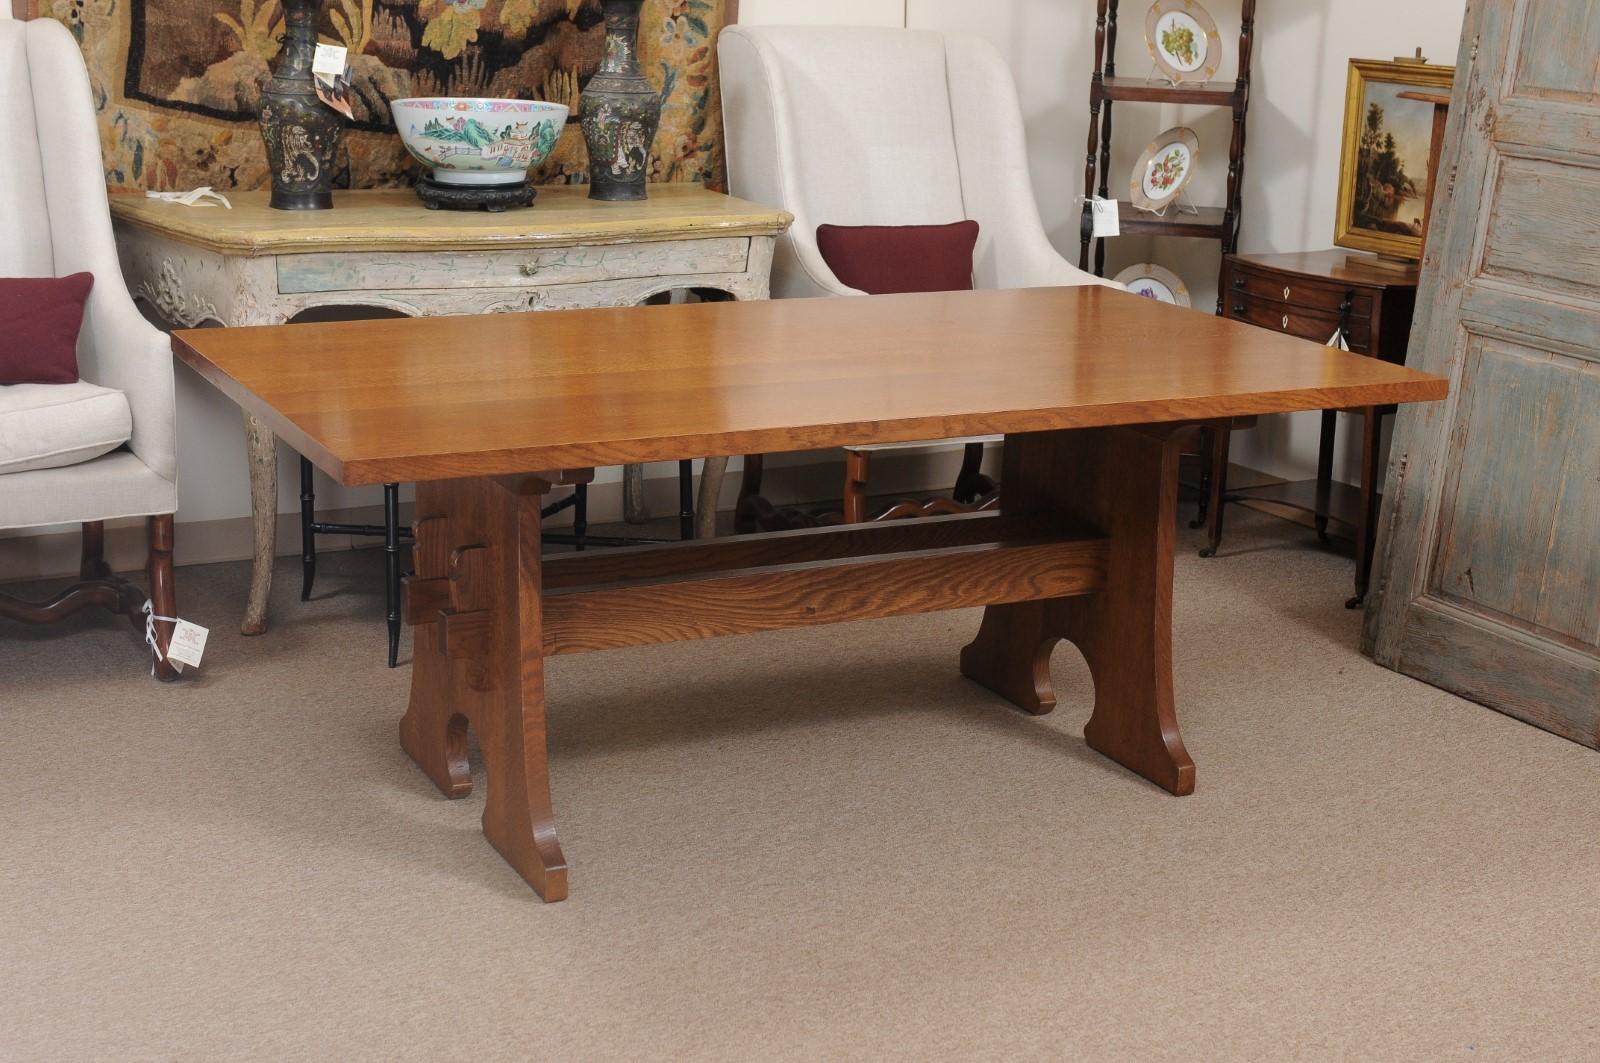 Stickley Arts & Crafts Mission Collection extending oak dining table with 2 removable leaves. Table with no leaves is 76